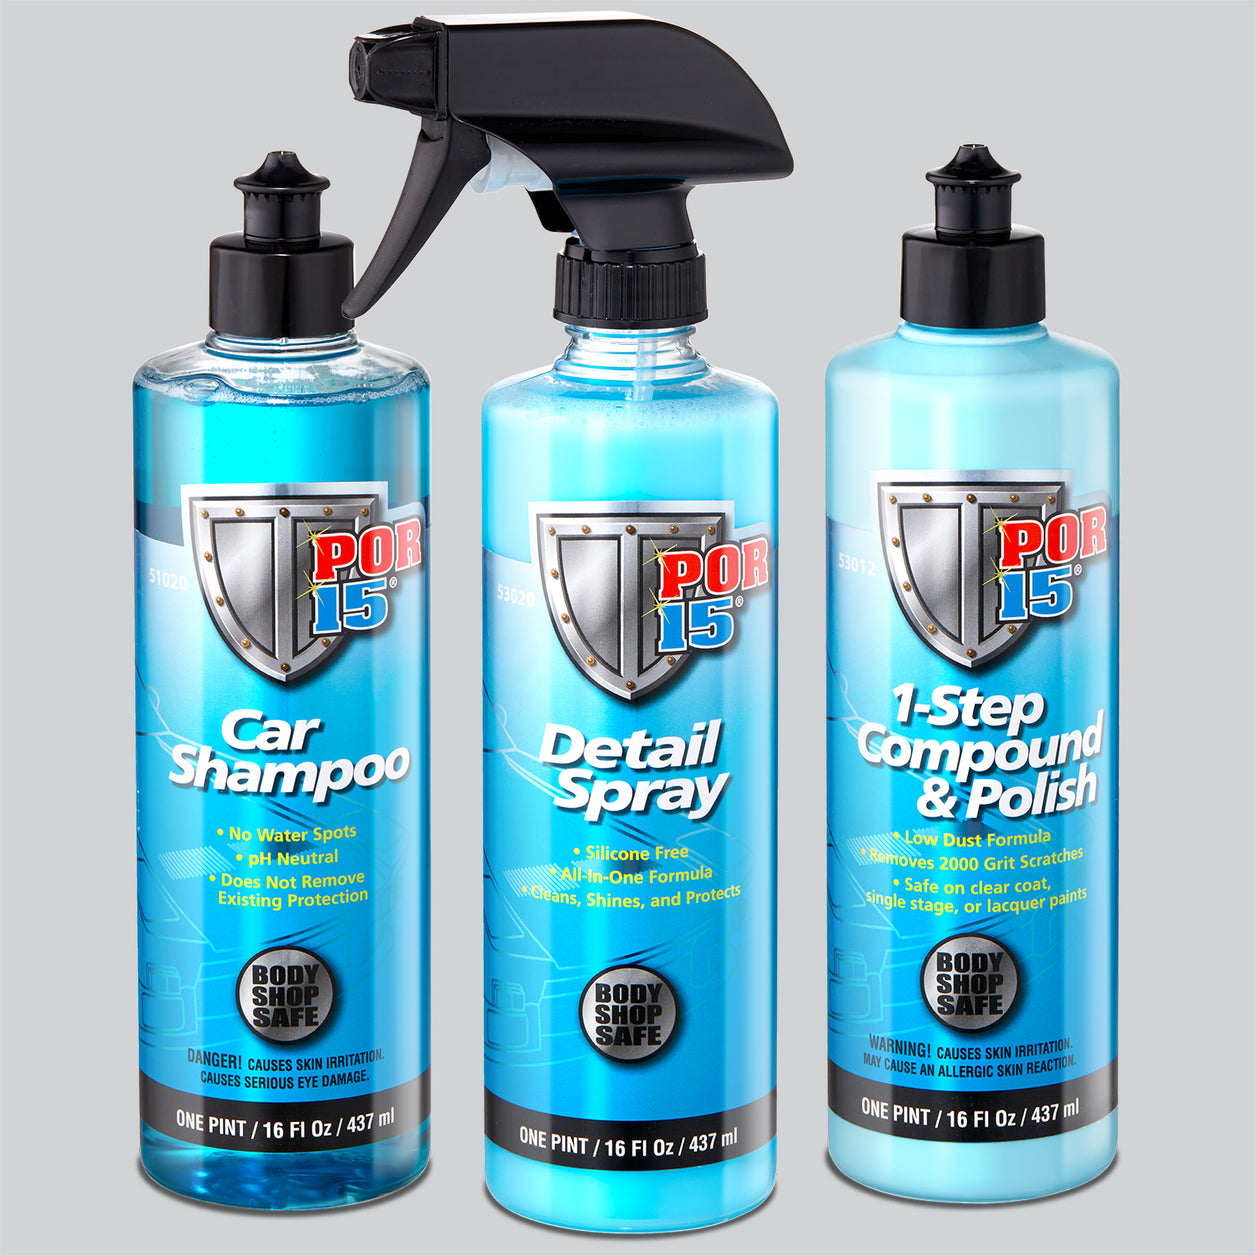 🌟CARPRO Descale, our strongest car shampoo! 💪Designed for maximum  efficiency against tough dirt, hard water and all manner of nastiness.  🛡Easily breaks down the built-up contamination that reduces gloss and  restores the